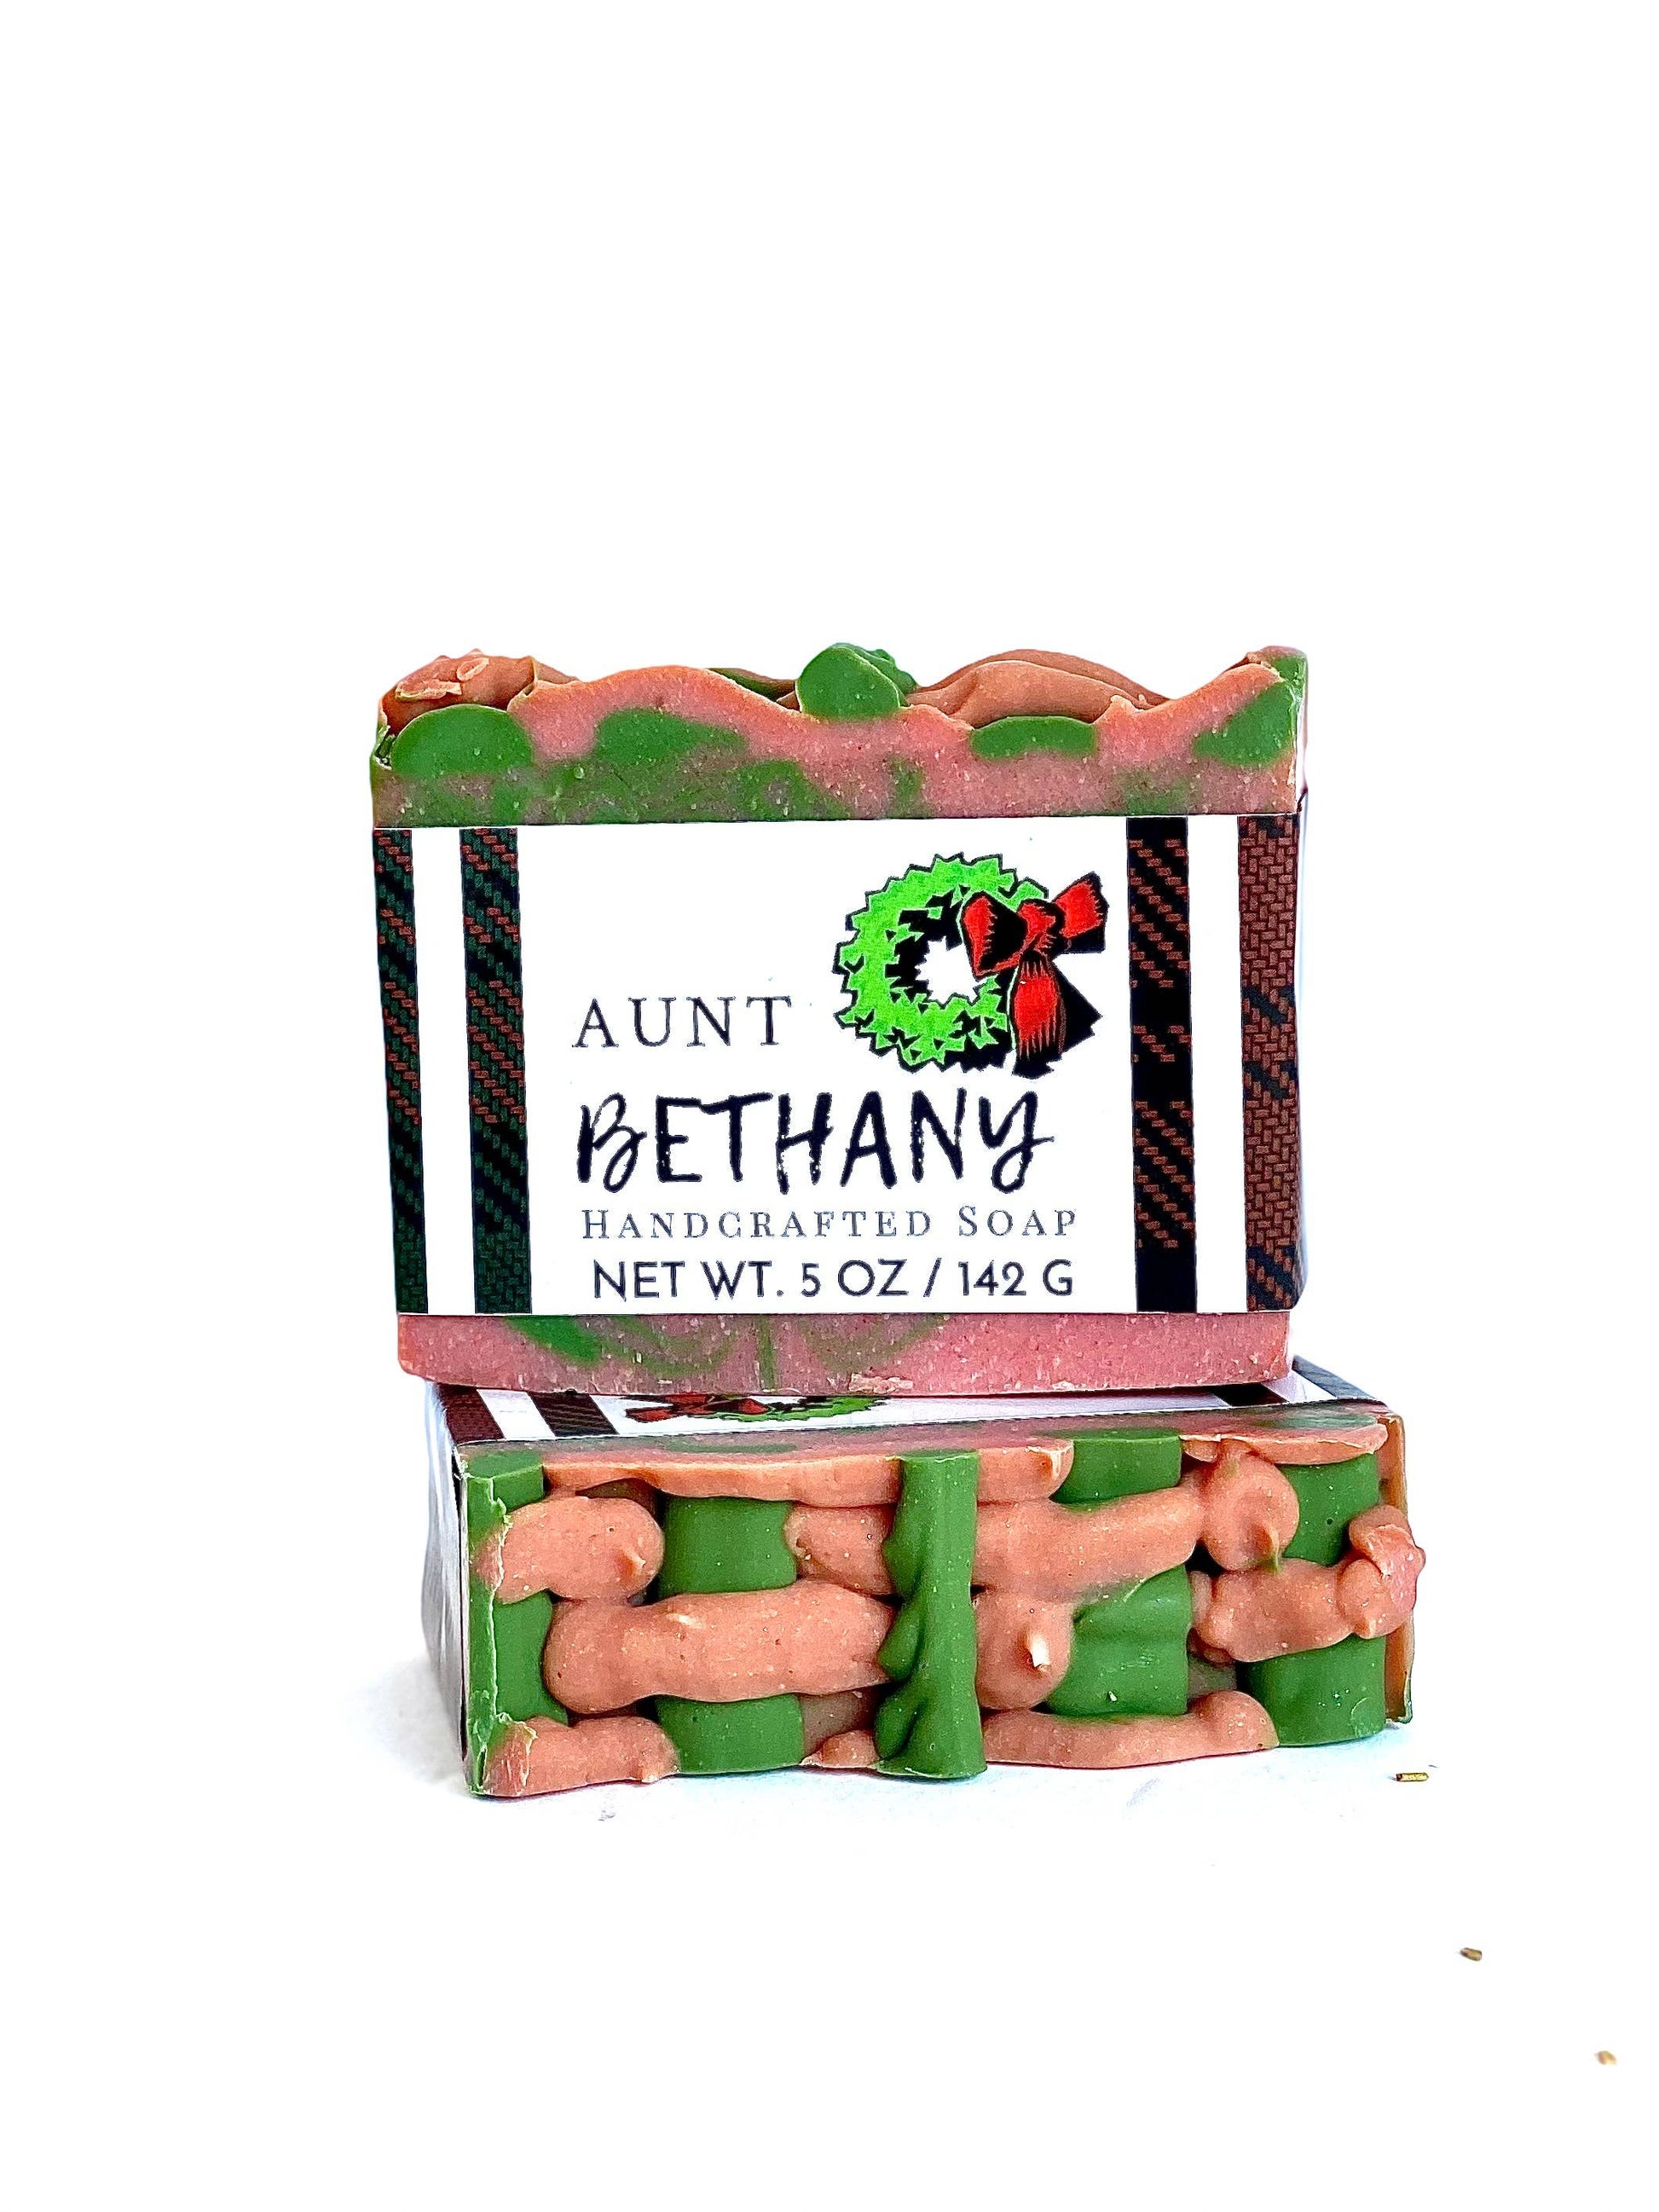 5 oz Aunt Bethany Handcrafted Soap - Pluff Mud Mercantile